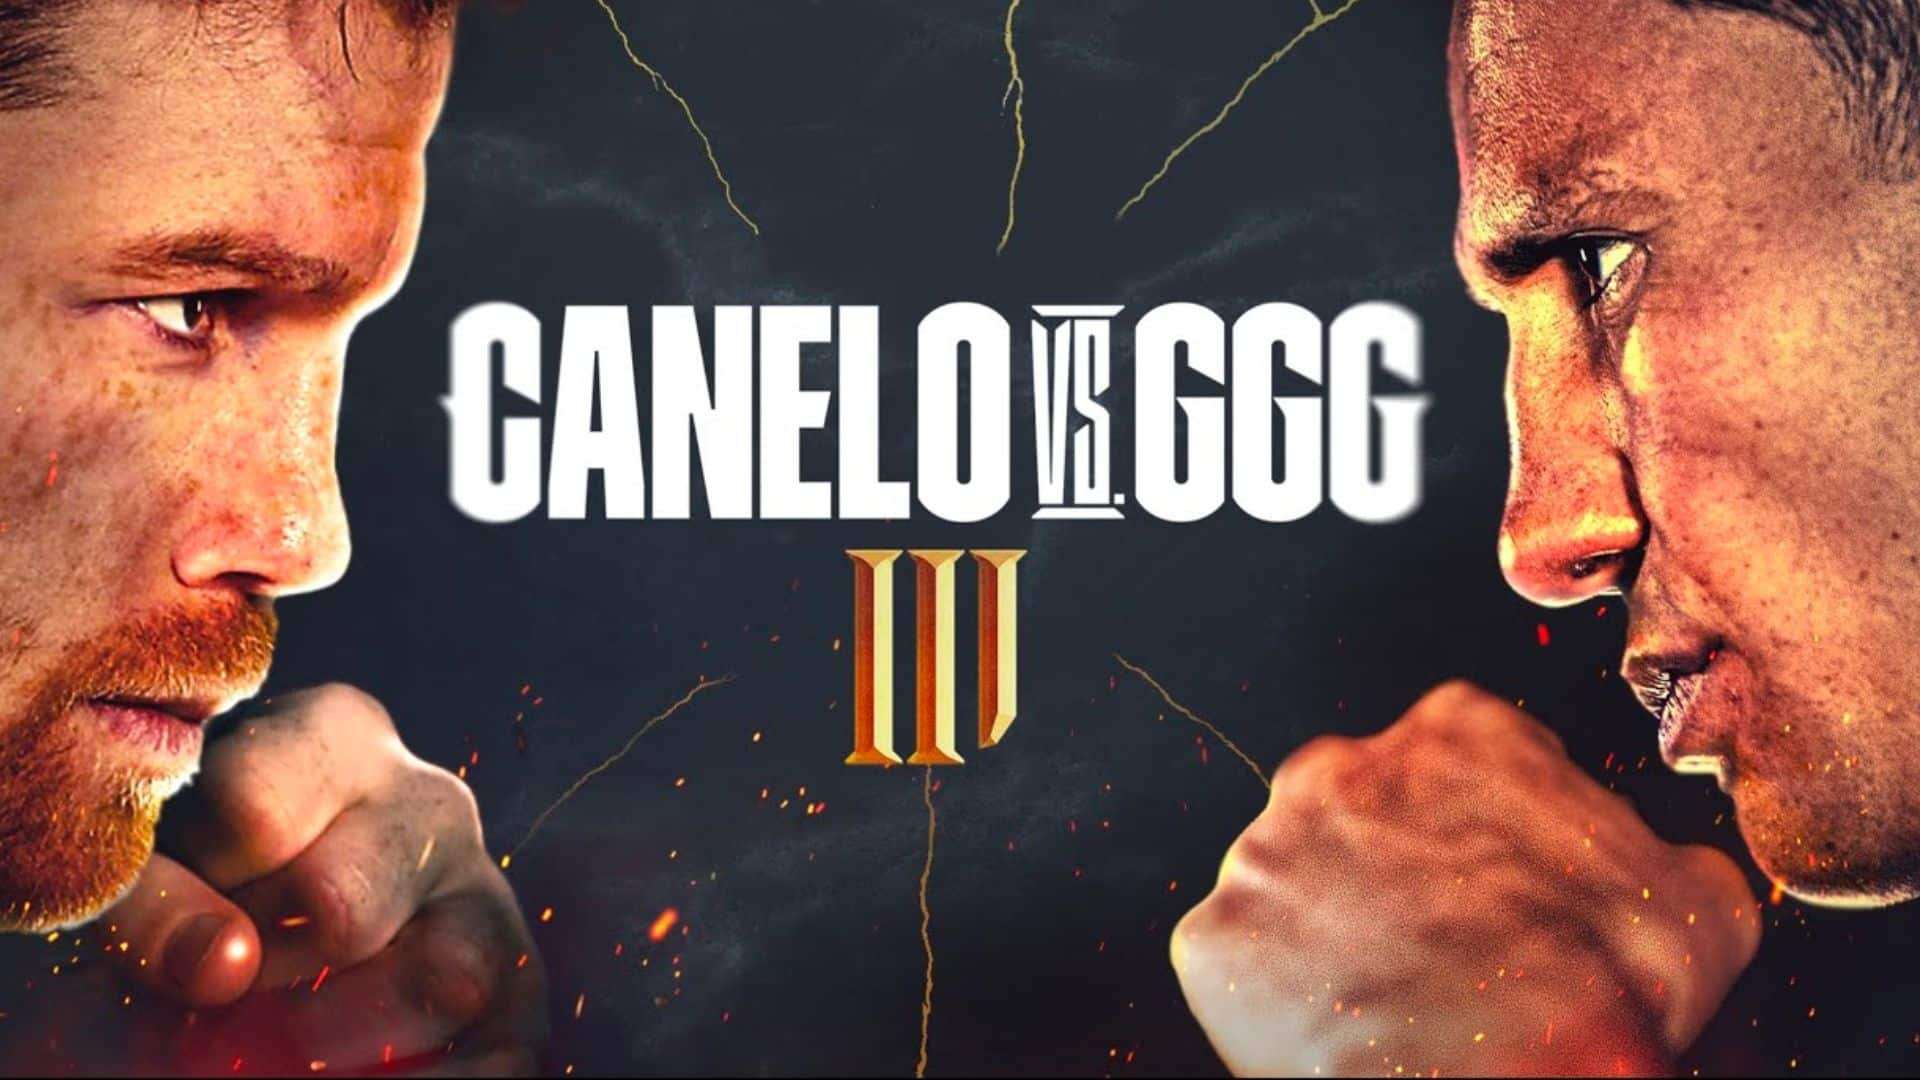 Canelo and Golovkin poster squaring off against grey background with gold text